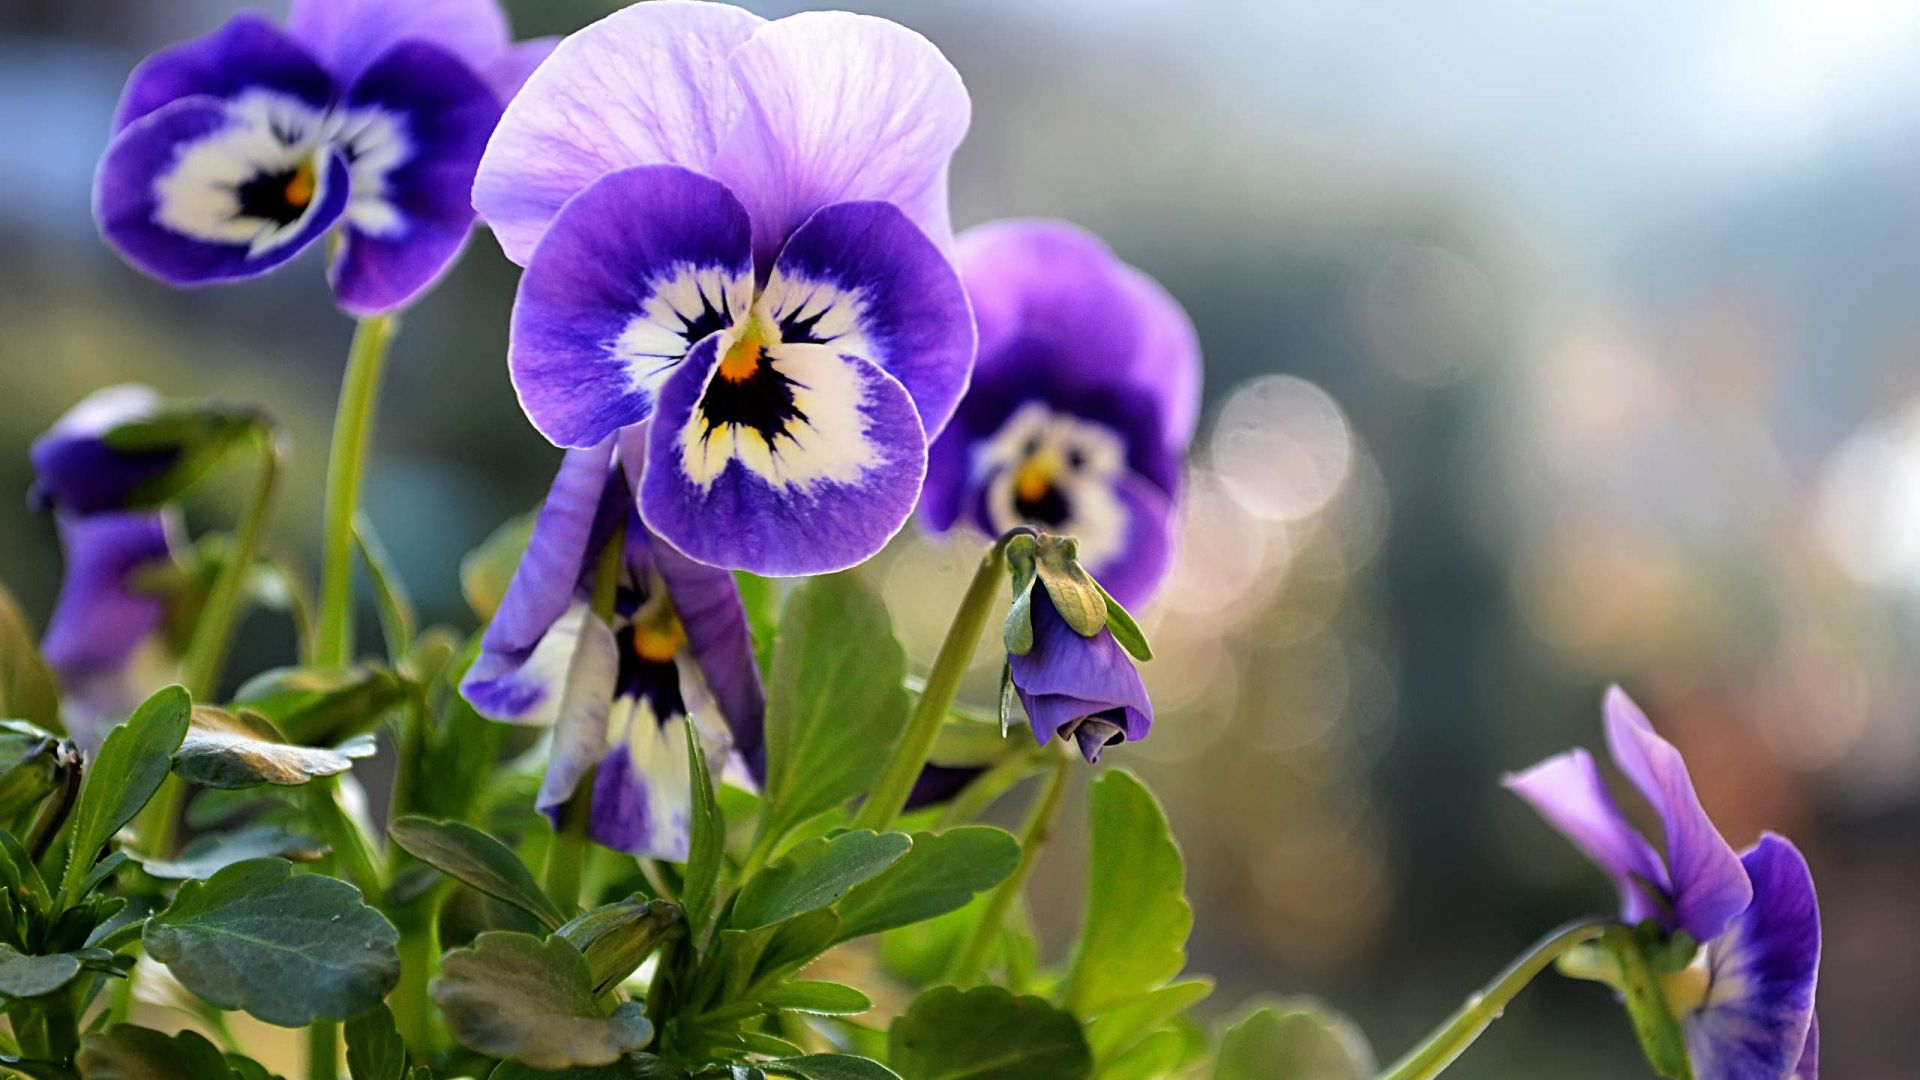 1920x1080 Desktop Wallpaper Beautiful Purple Pansy Flowers, Close Up, Hd Image, Picture, Background, My9vds